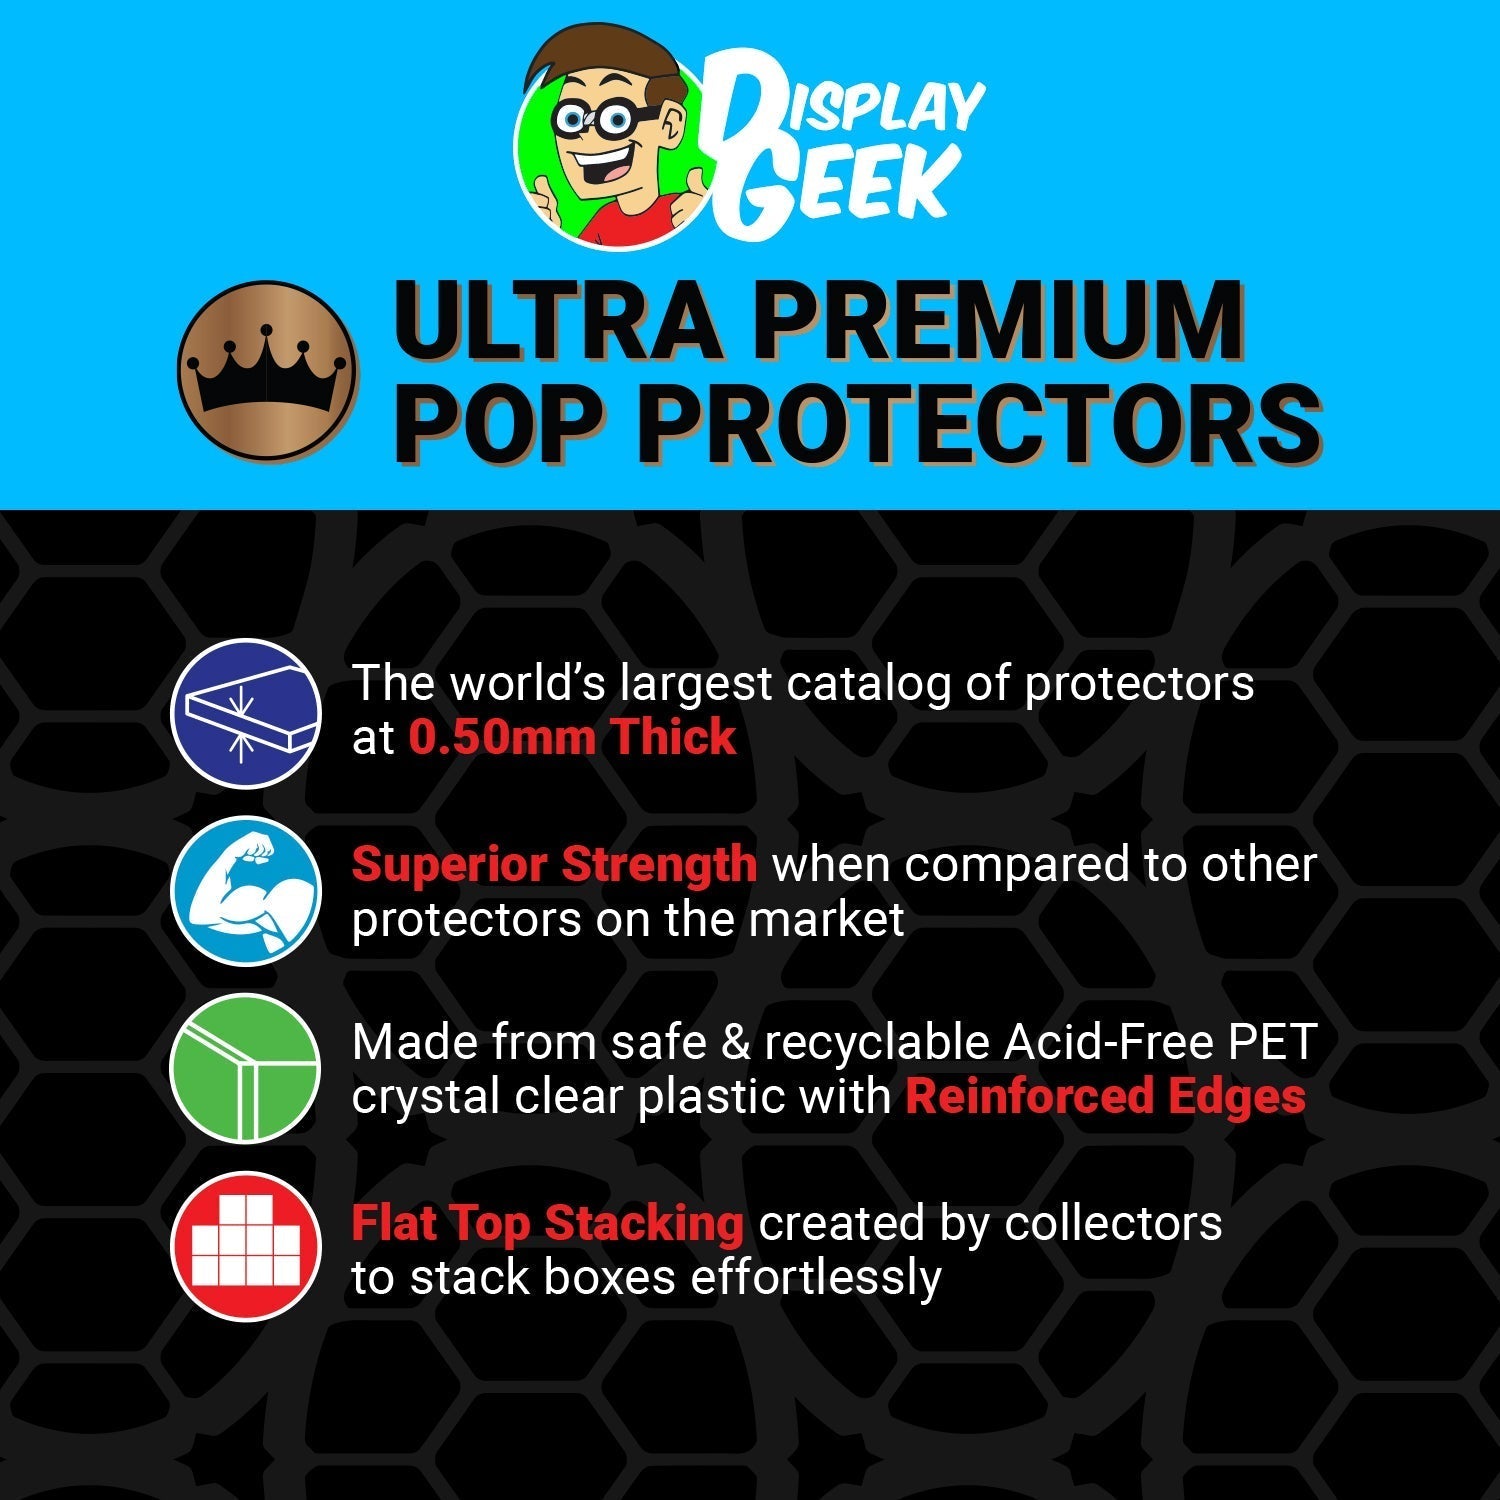 Pop Protector for 9 inch Giant Maleficent Funko Pop - PPG Pop Protector Guide Search Created by Display Geek